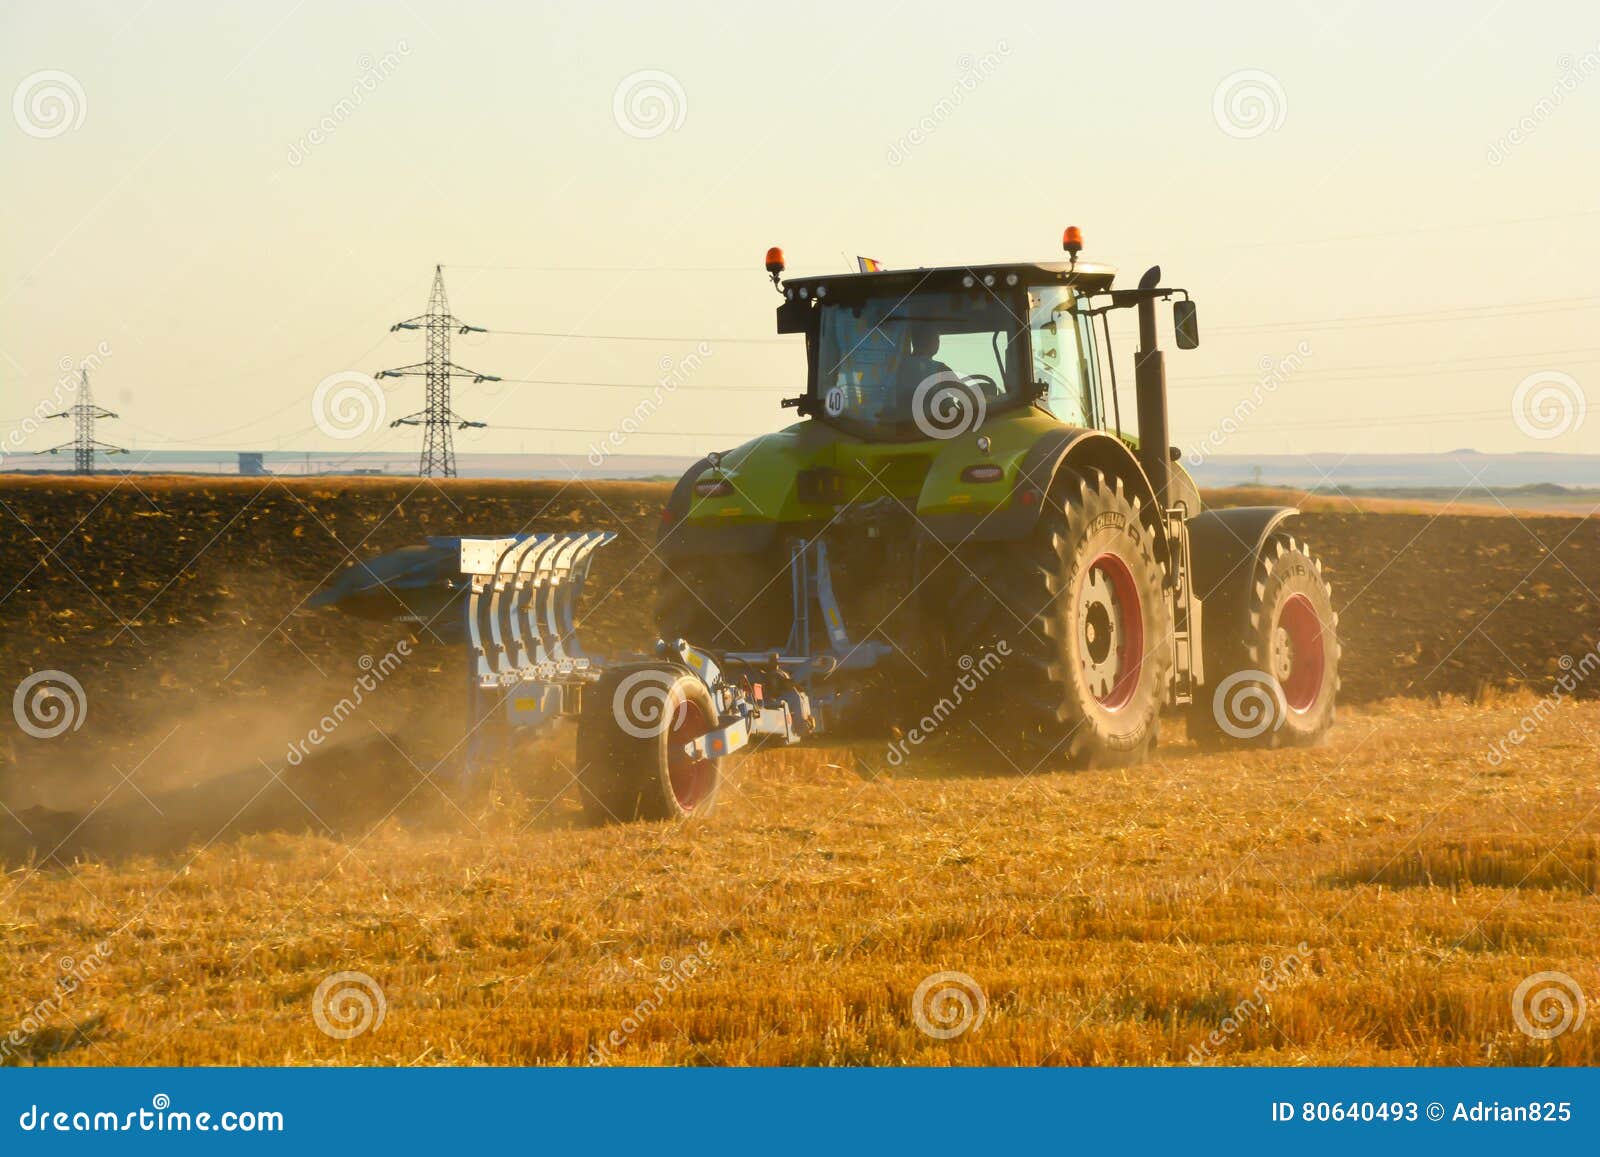 modern farming with tractor in plowed field